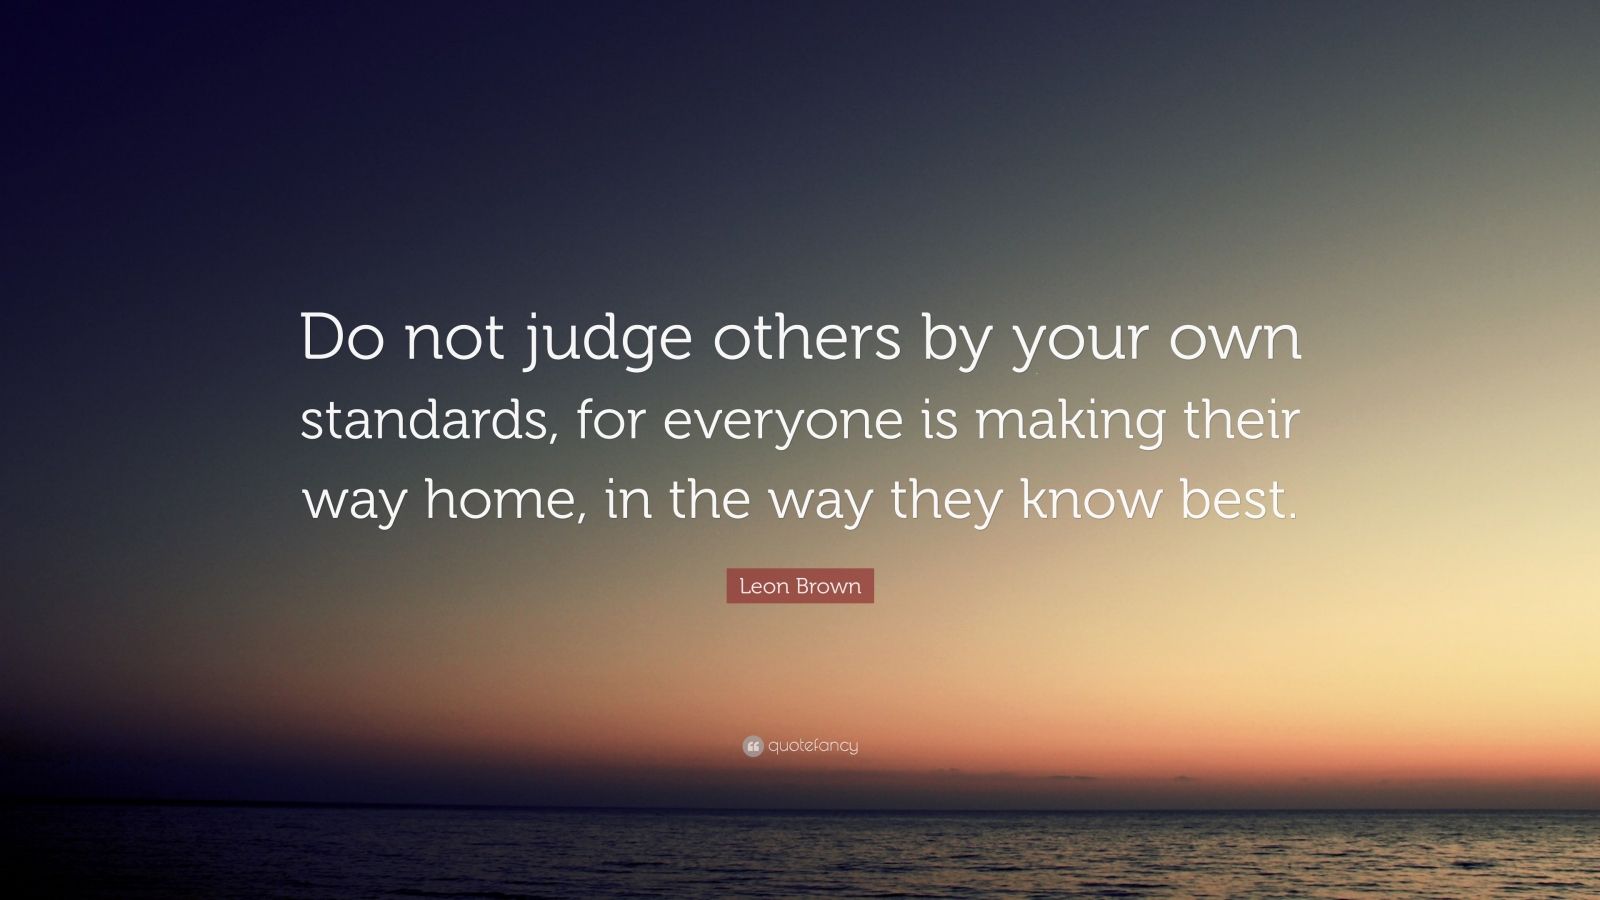 Leon Brown Quote: "Do not judge others by your own standards, for everyone is making their way ...